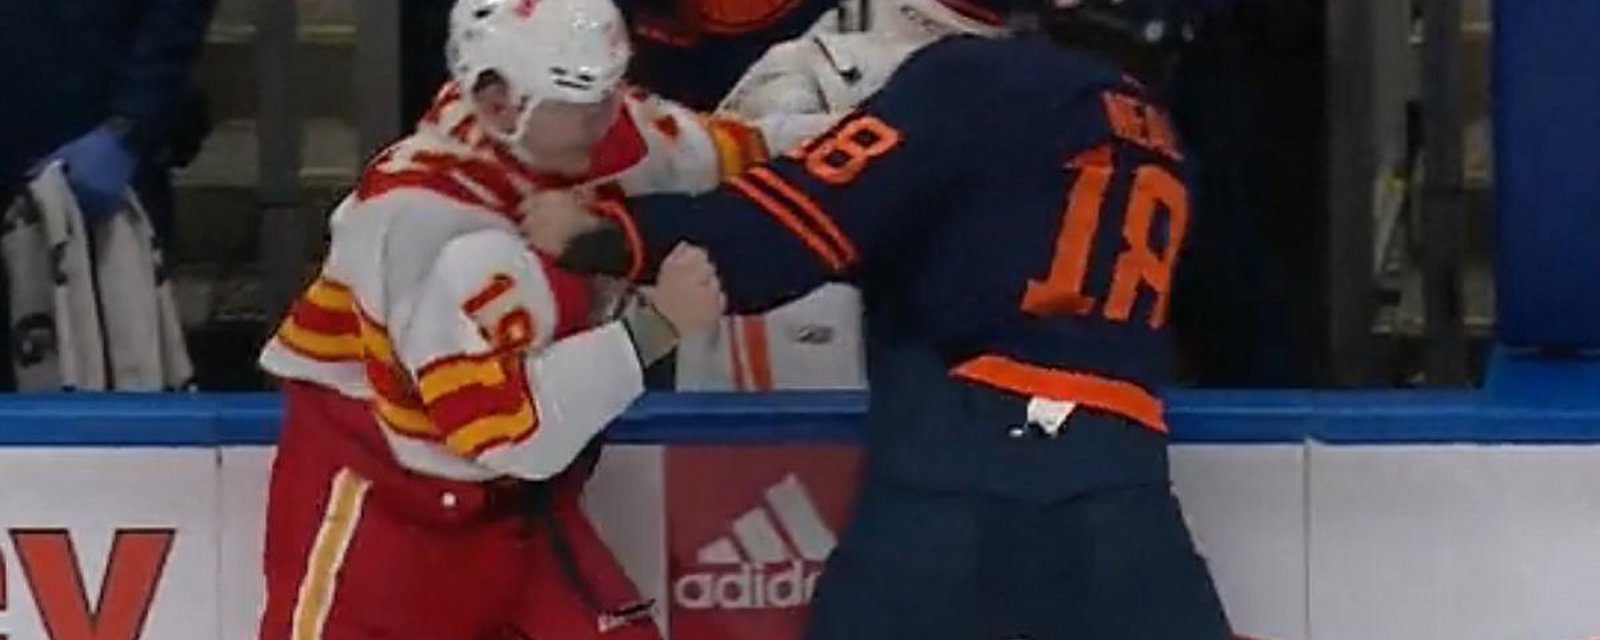 Matthew Tkachuk and James Neal drop the gloves in the Battle of Alberta.